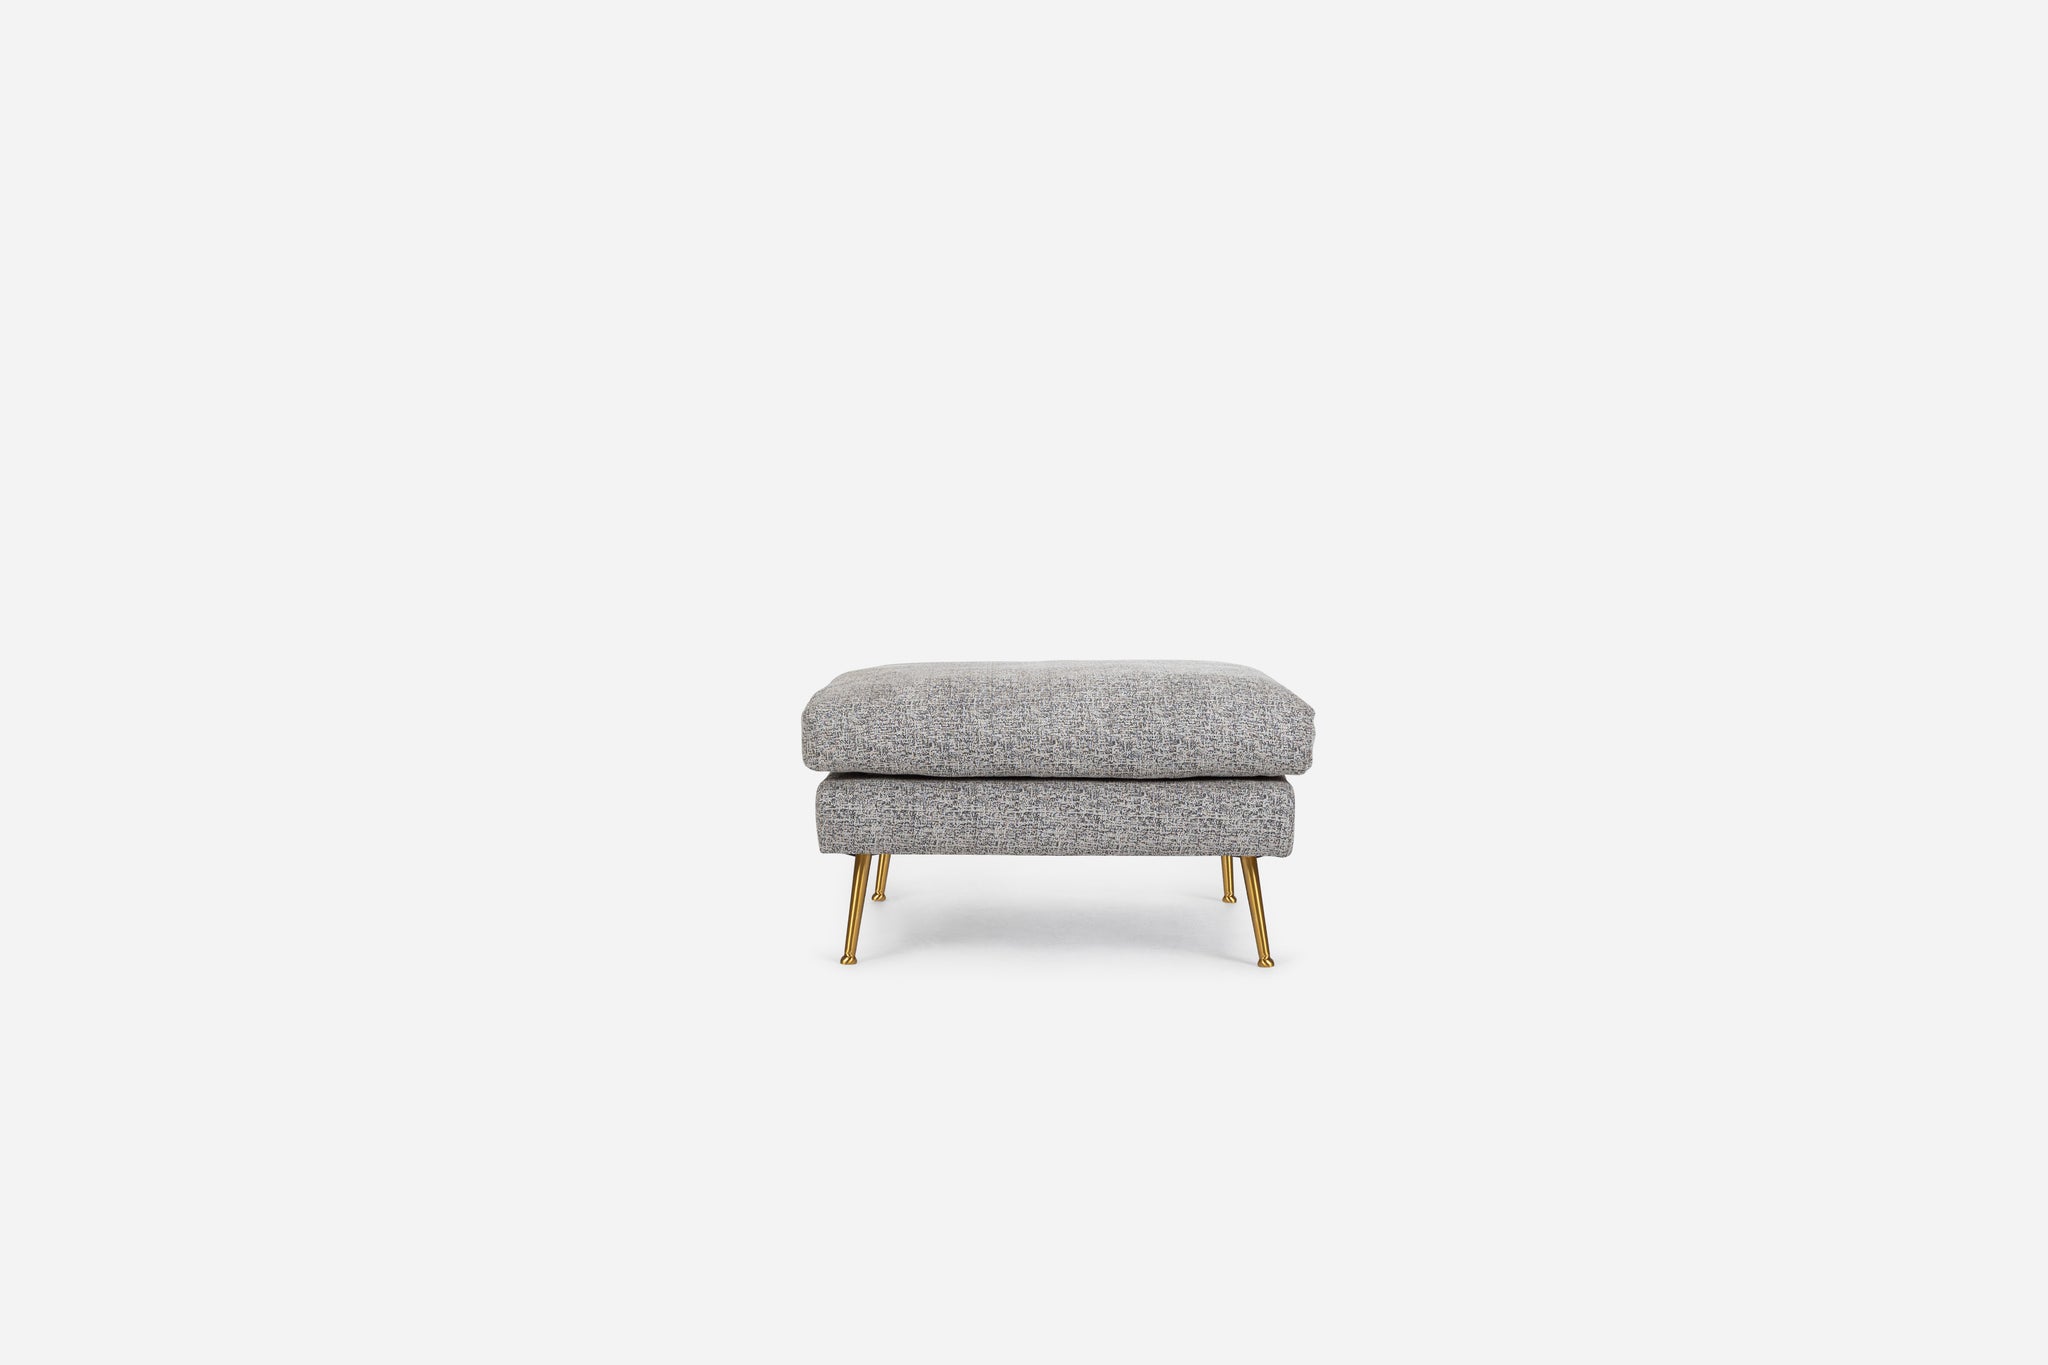 park ottoman shown in grey fabric with gold legs